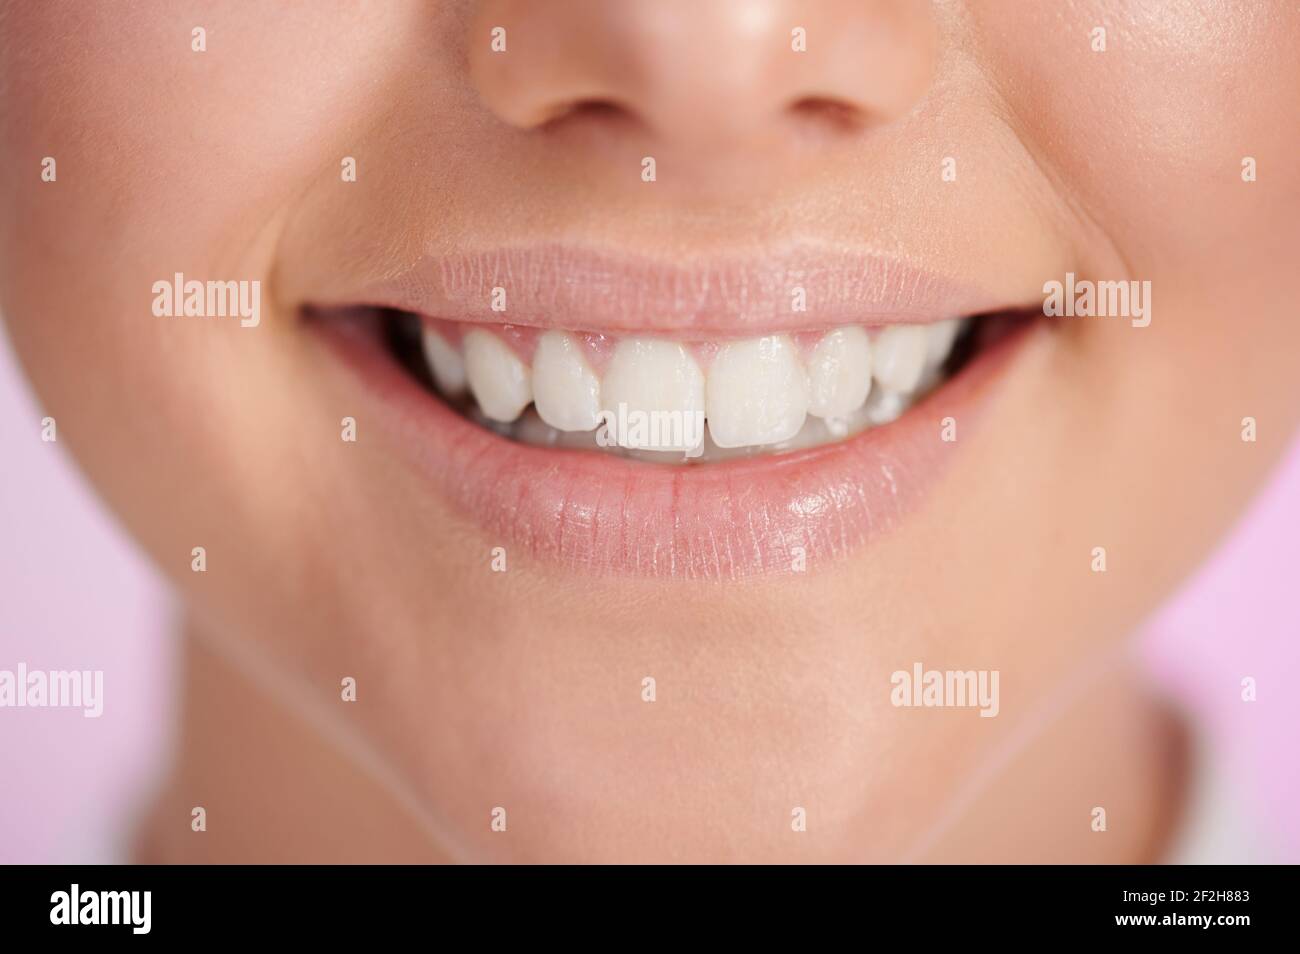 Happy smile with white teeth macro close up view Stock Photo